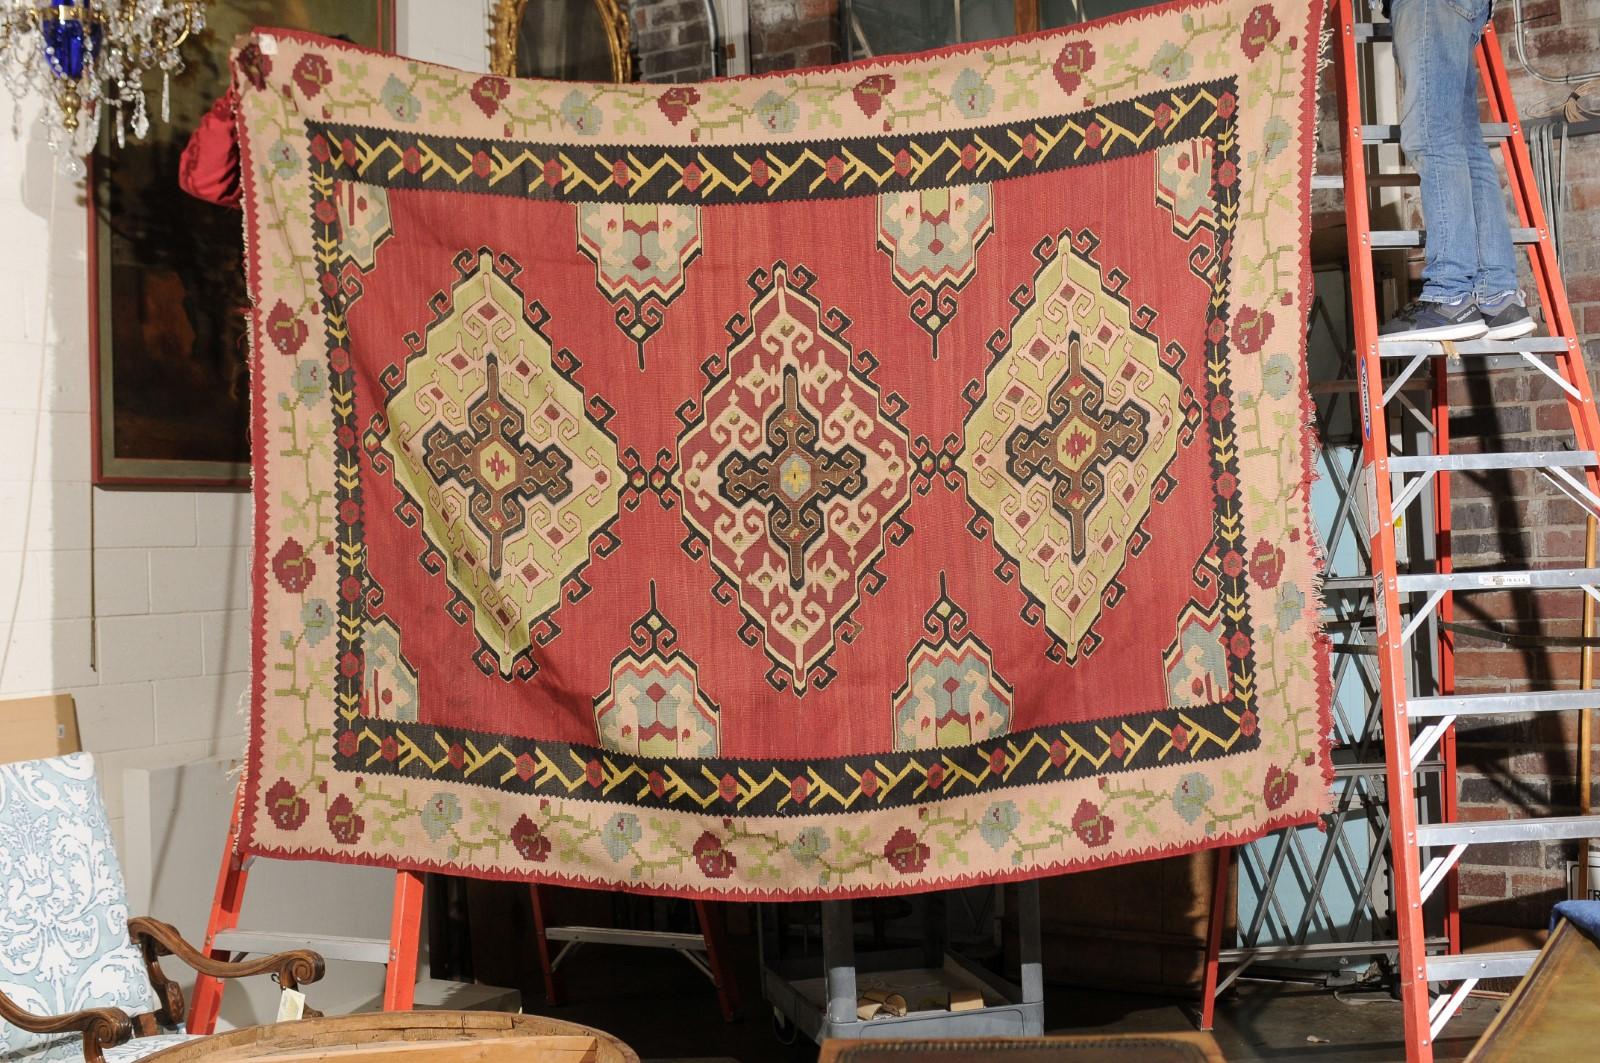 Kilim rug handwoven in the style of Karabakh featuring cream and red border with blue and red flowers and green vine work, black inner border with yellow and red floral motif and red inner area featuring geometric forms with blue green, red, black